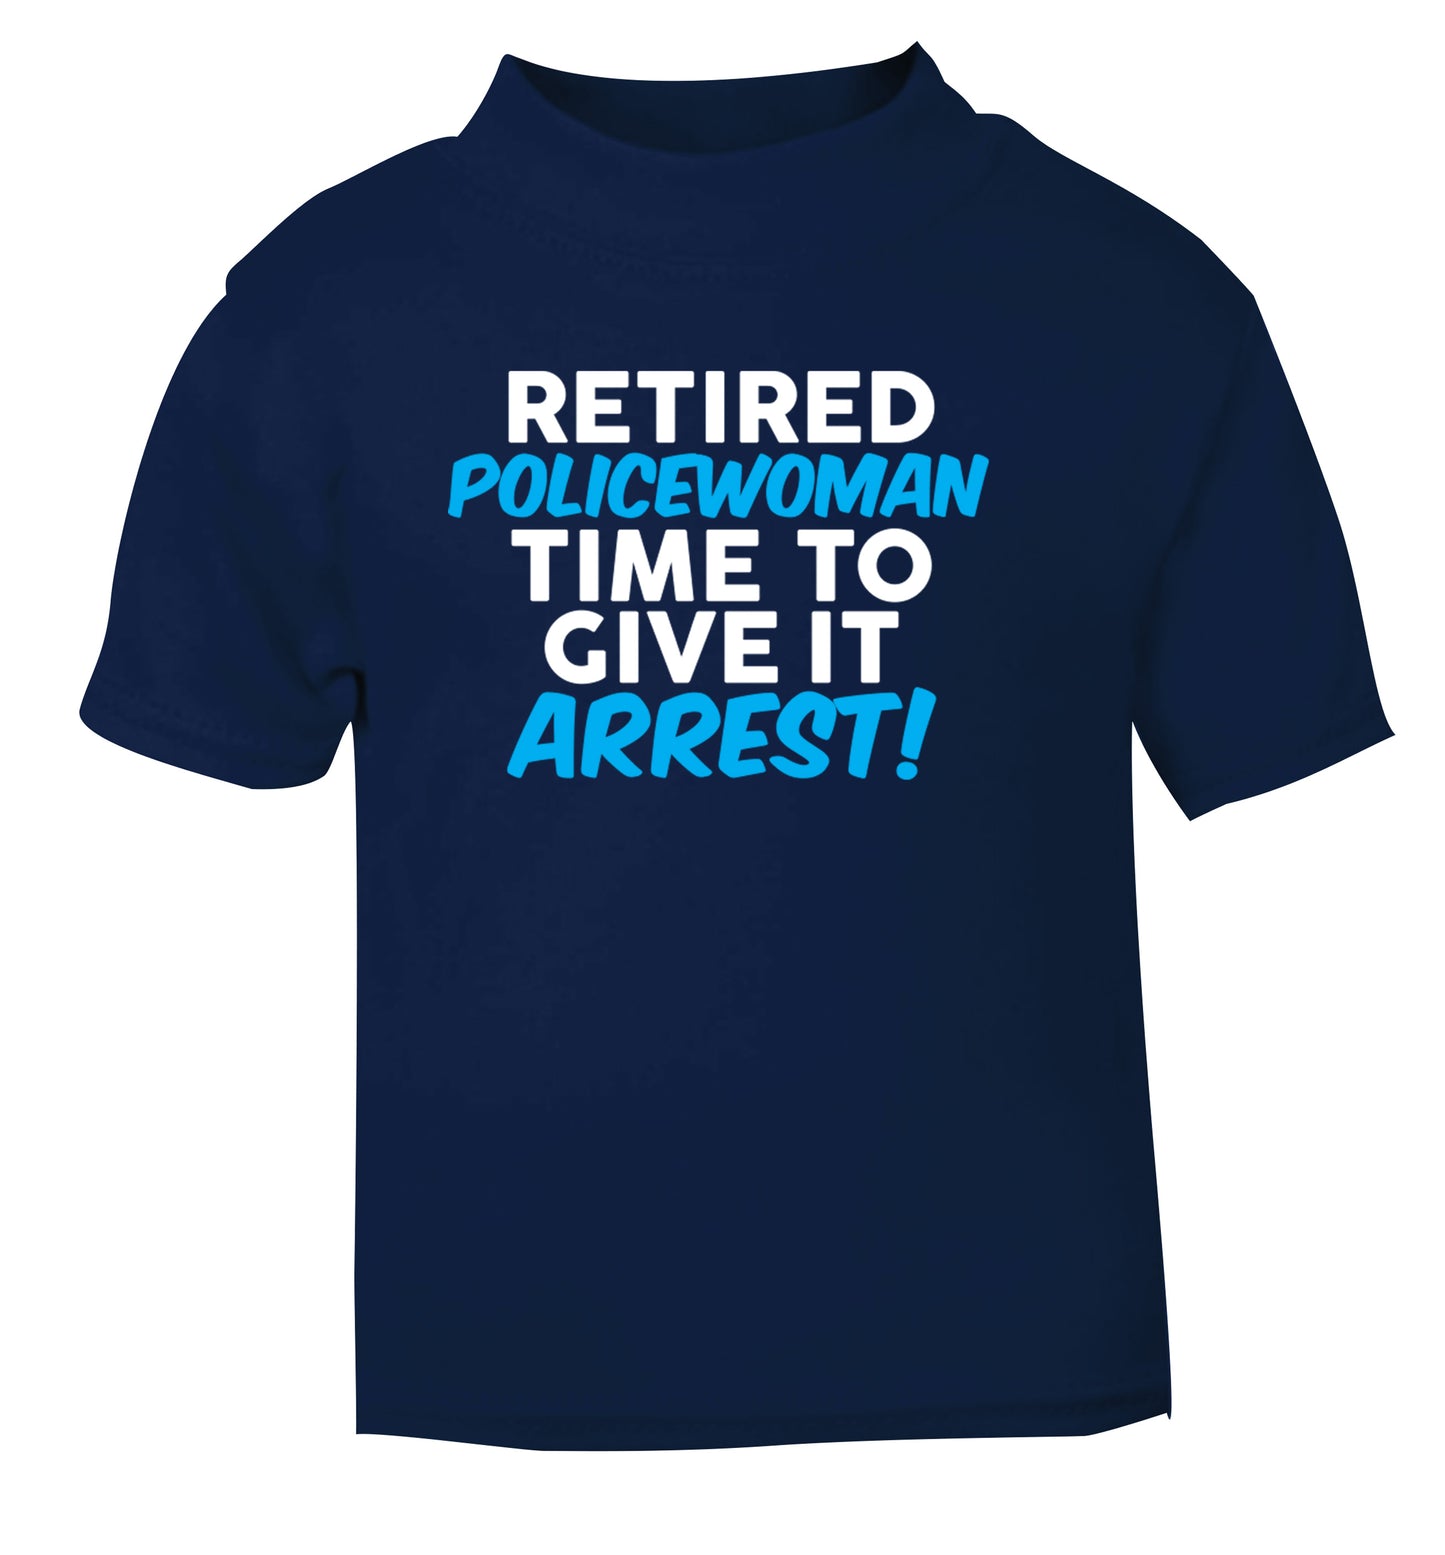 Retired policewoman time to give it arrest navy Baby Toddler Tshirt 2 Years